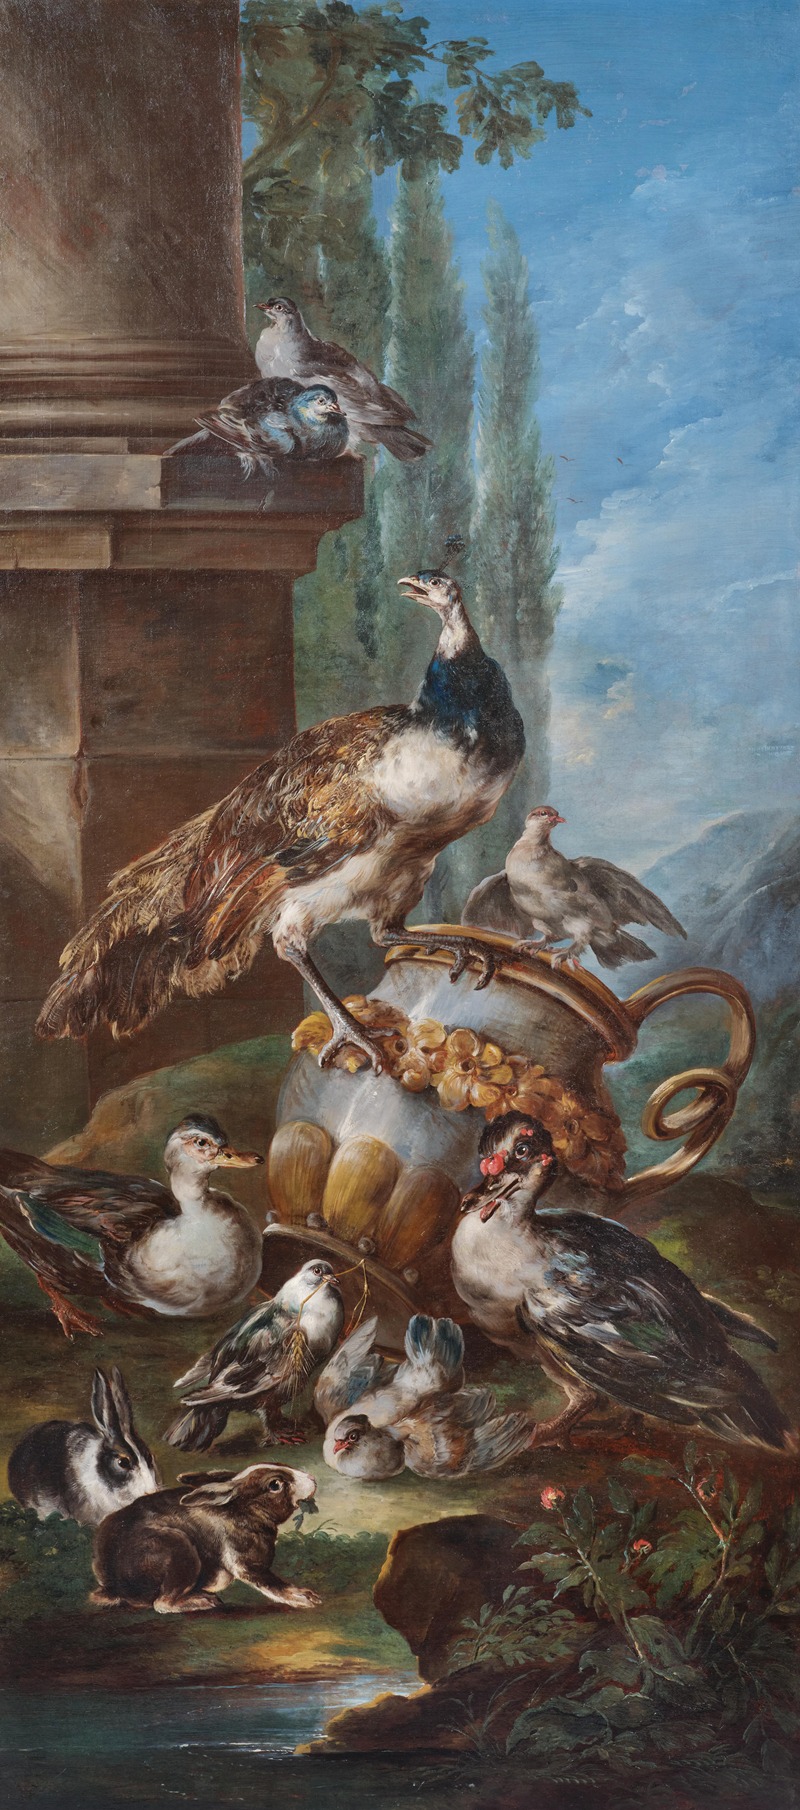 Angelo Maria Crivelli - A peacock, pigeons, ducks and rabbits in an idealised landscape